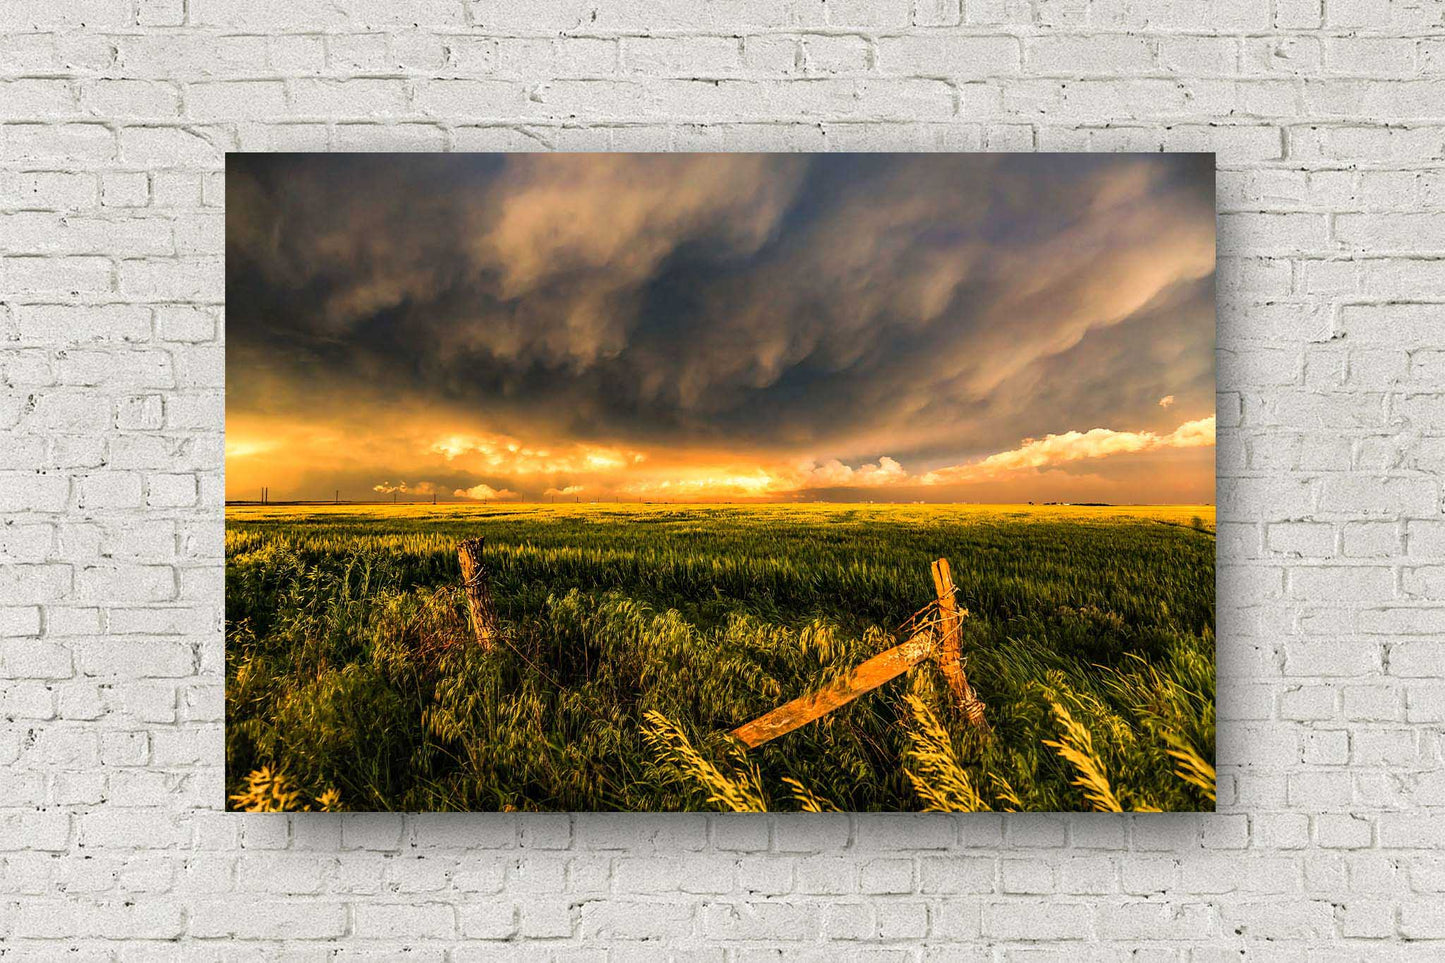 Great Plains metal print of storm clouds illuminated by sunlight over a wheat field on a stormy spring evening in Kansas by Sean Ramsey of Southern Plains Photography.